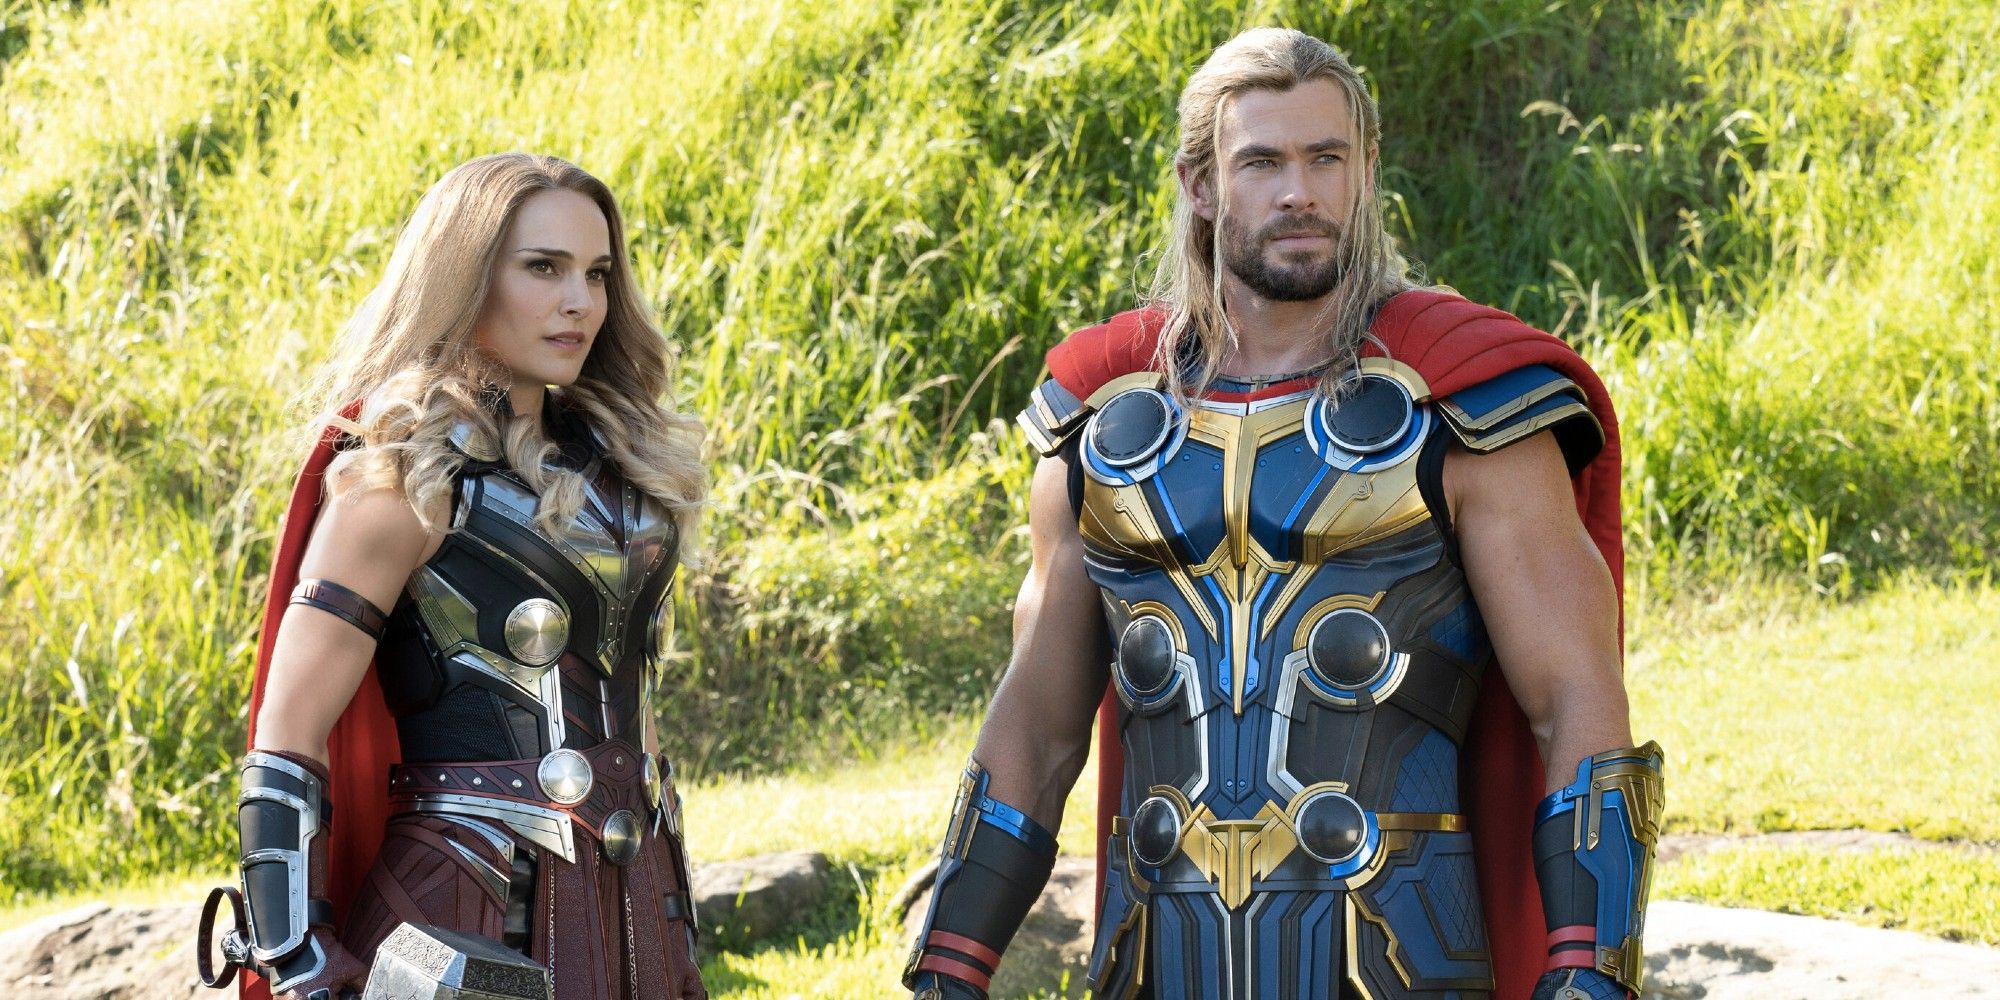 Natalie Portman and Chris Hemsworth as Jane Foster and Thor Odinson in Thor: Love and Thunder